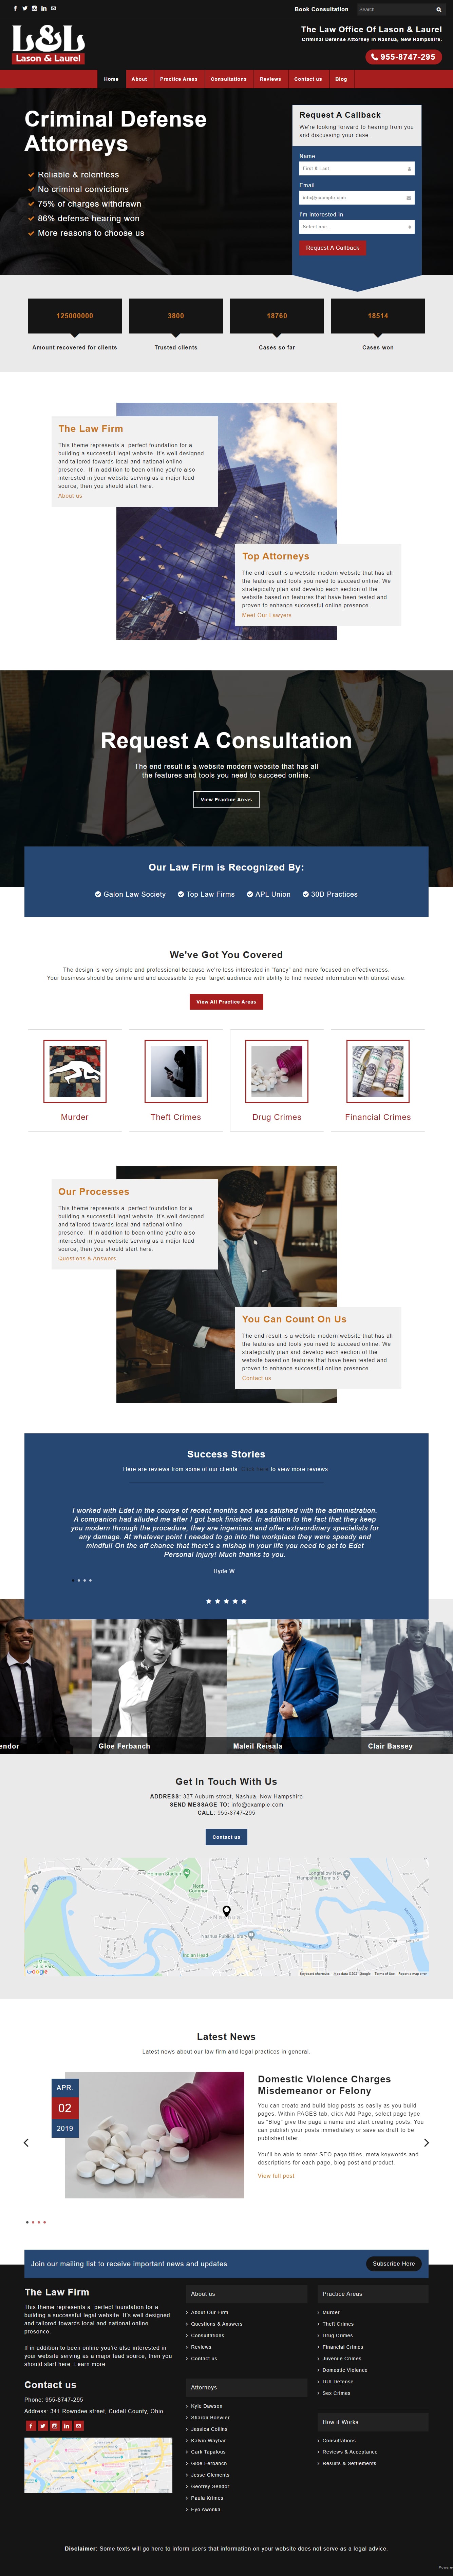 Lason law templates for weebly websites